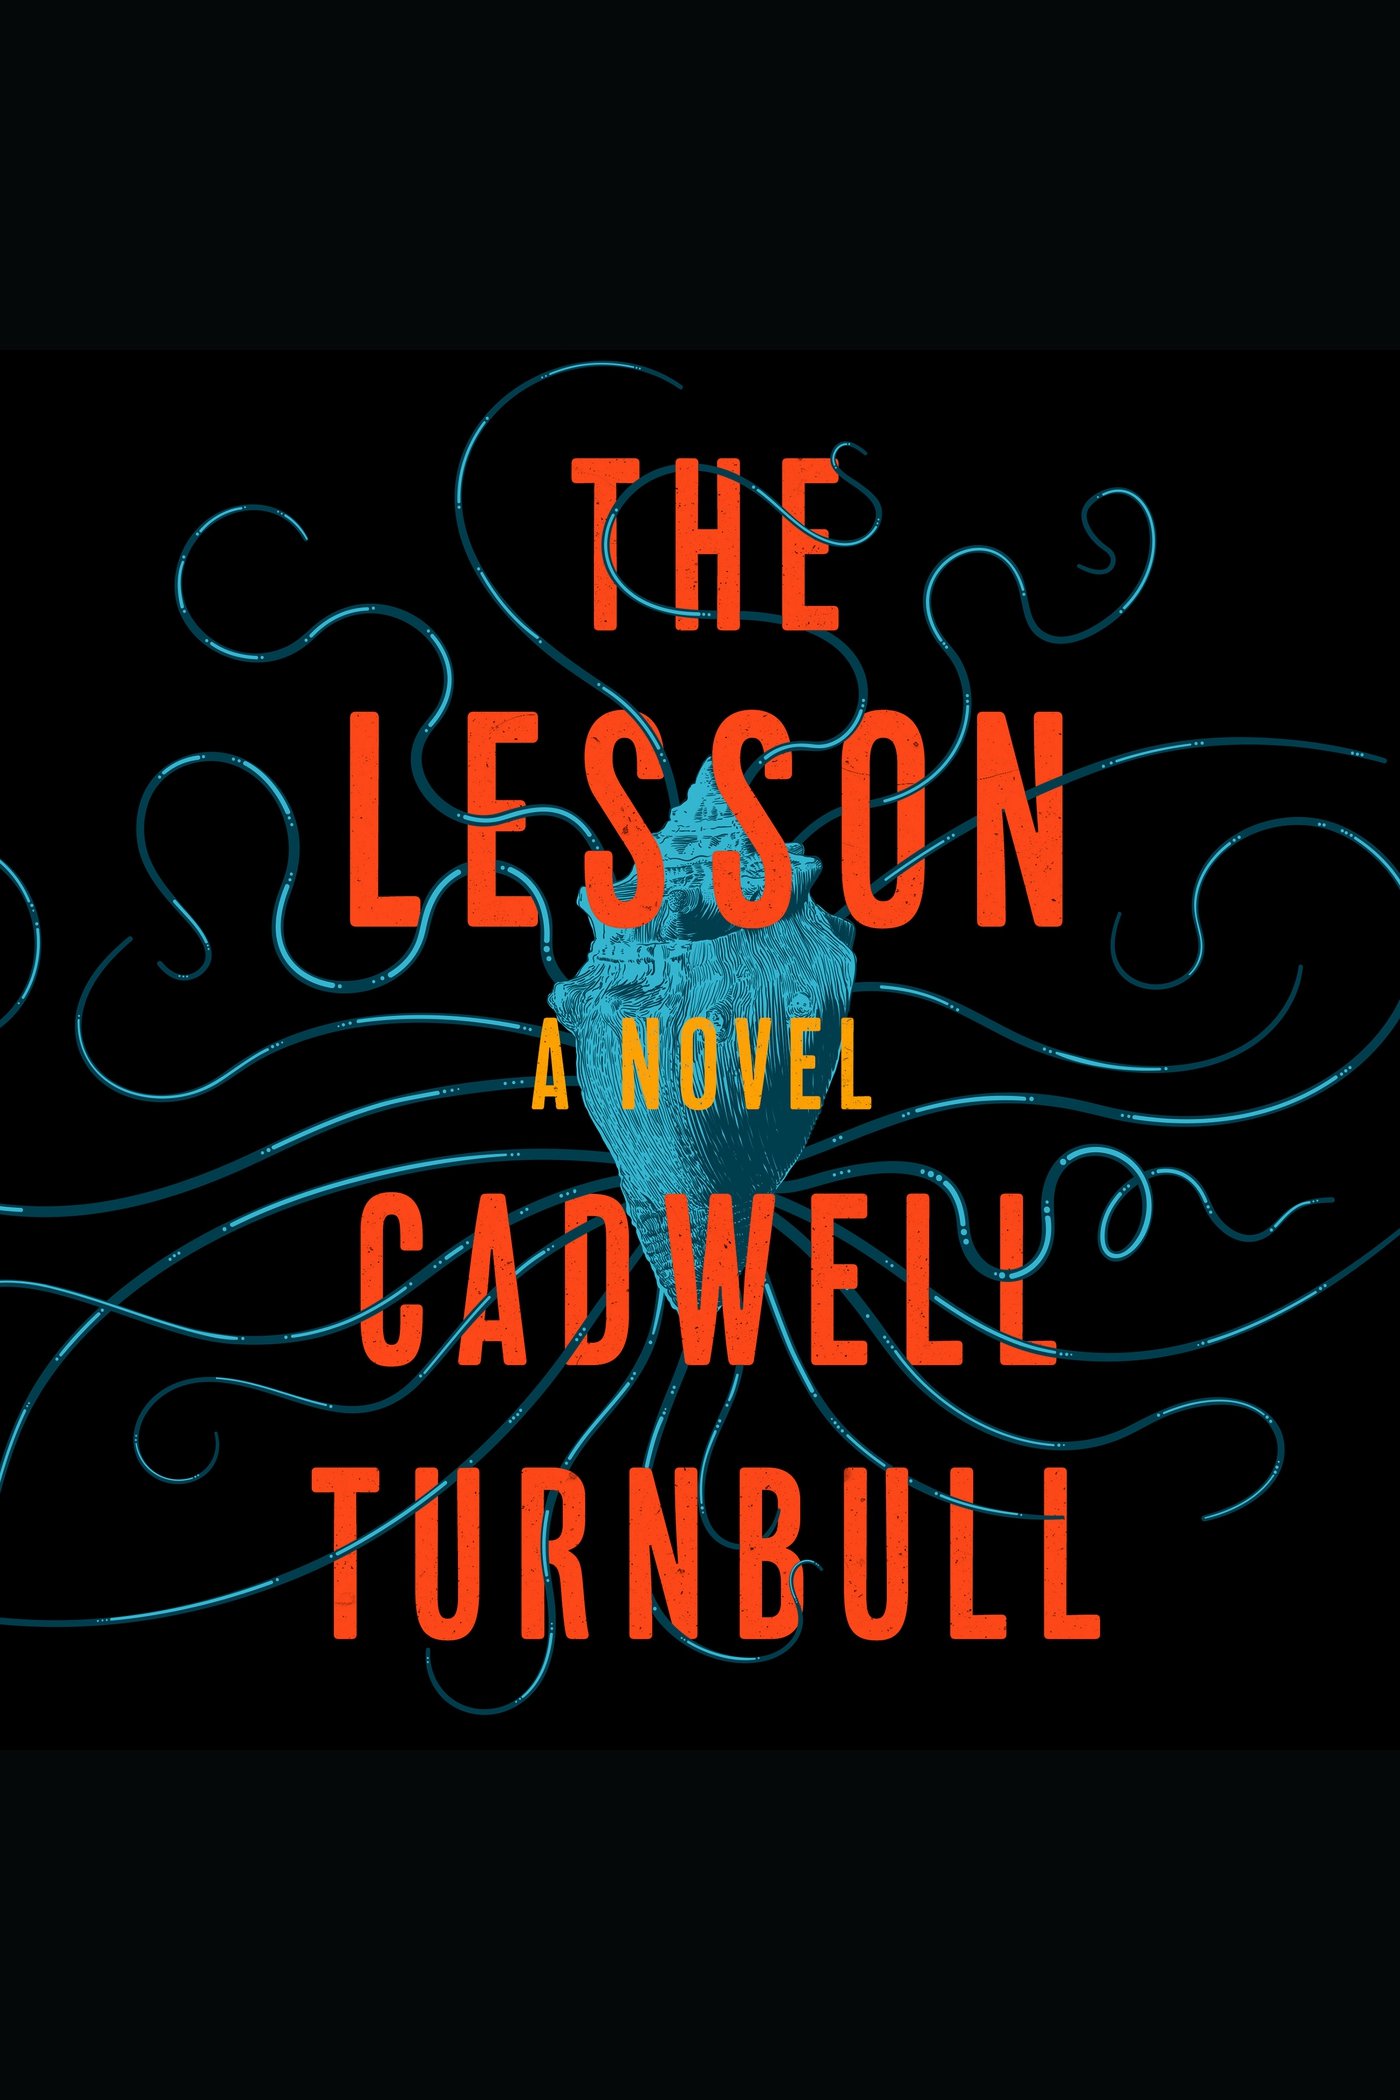 The lesson cover image